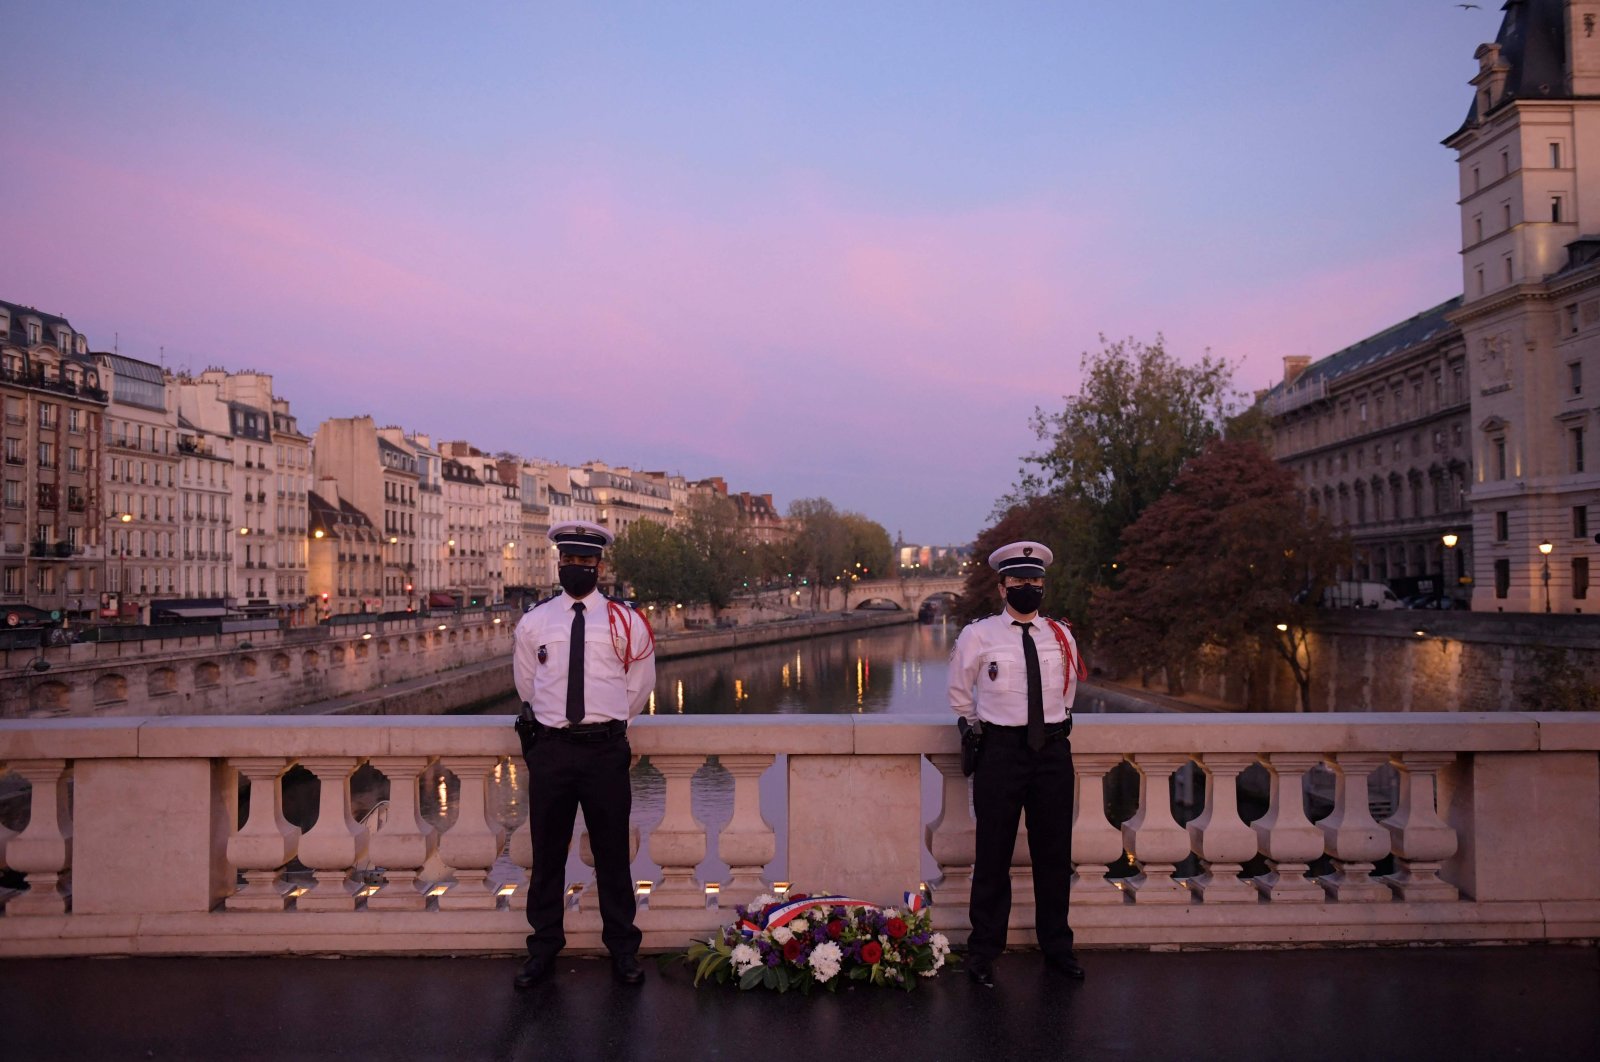 Police officers stand near a wreath of flowers on the Saint Michel bridge during a ceremony to commemorate France's brutal repression of an Oct. 17, 1961, anticolonialism demonstration where at least 120 Algerians were killed, Paris, France, Oct. 17, 2021. (AFP Photo)